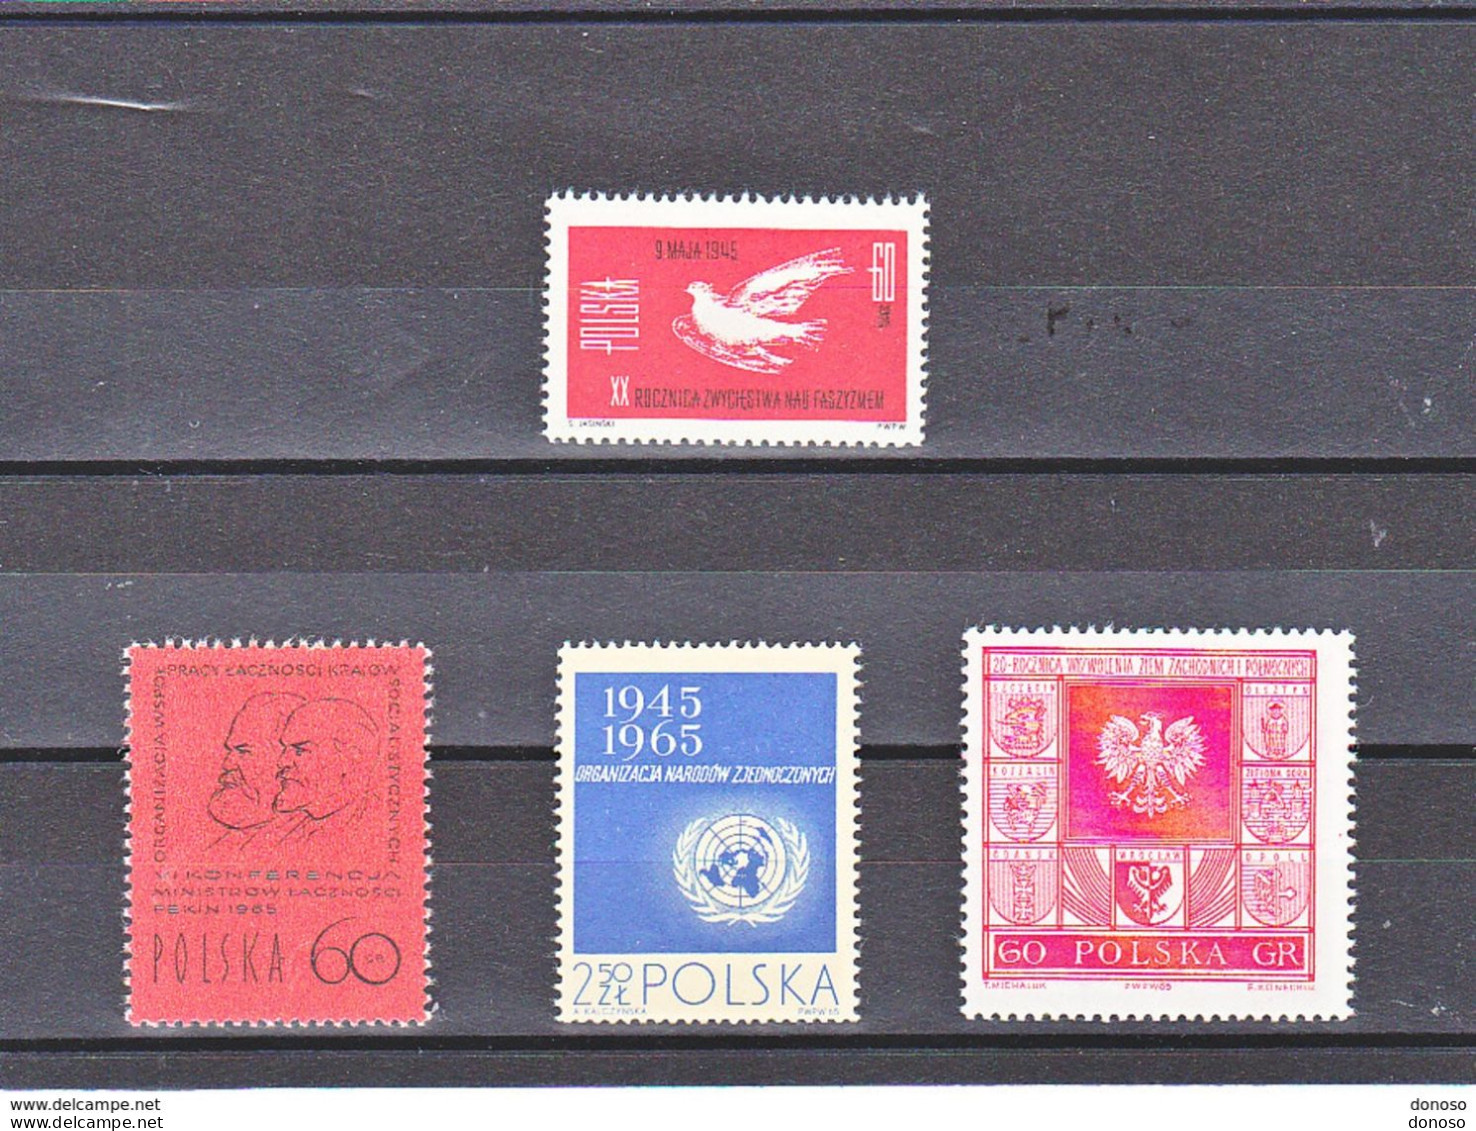 POLOGNE 1965 Yvert 1435-1436 + 1448 + 1482, Michel 1582-1583 + 1596 + 1631 NEUF** MNH - Unused Stamps